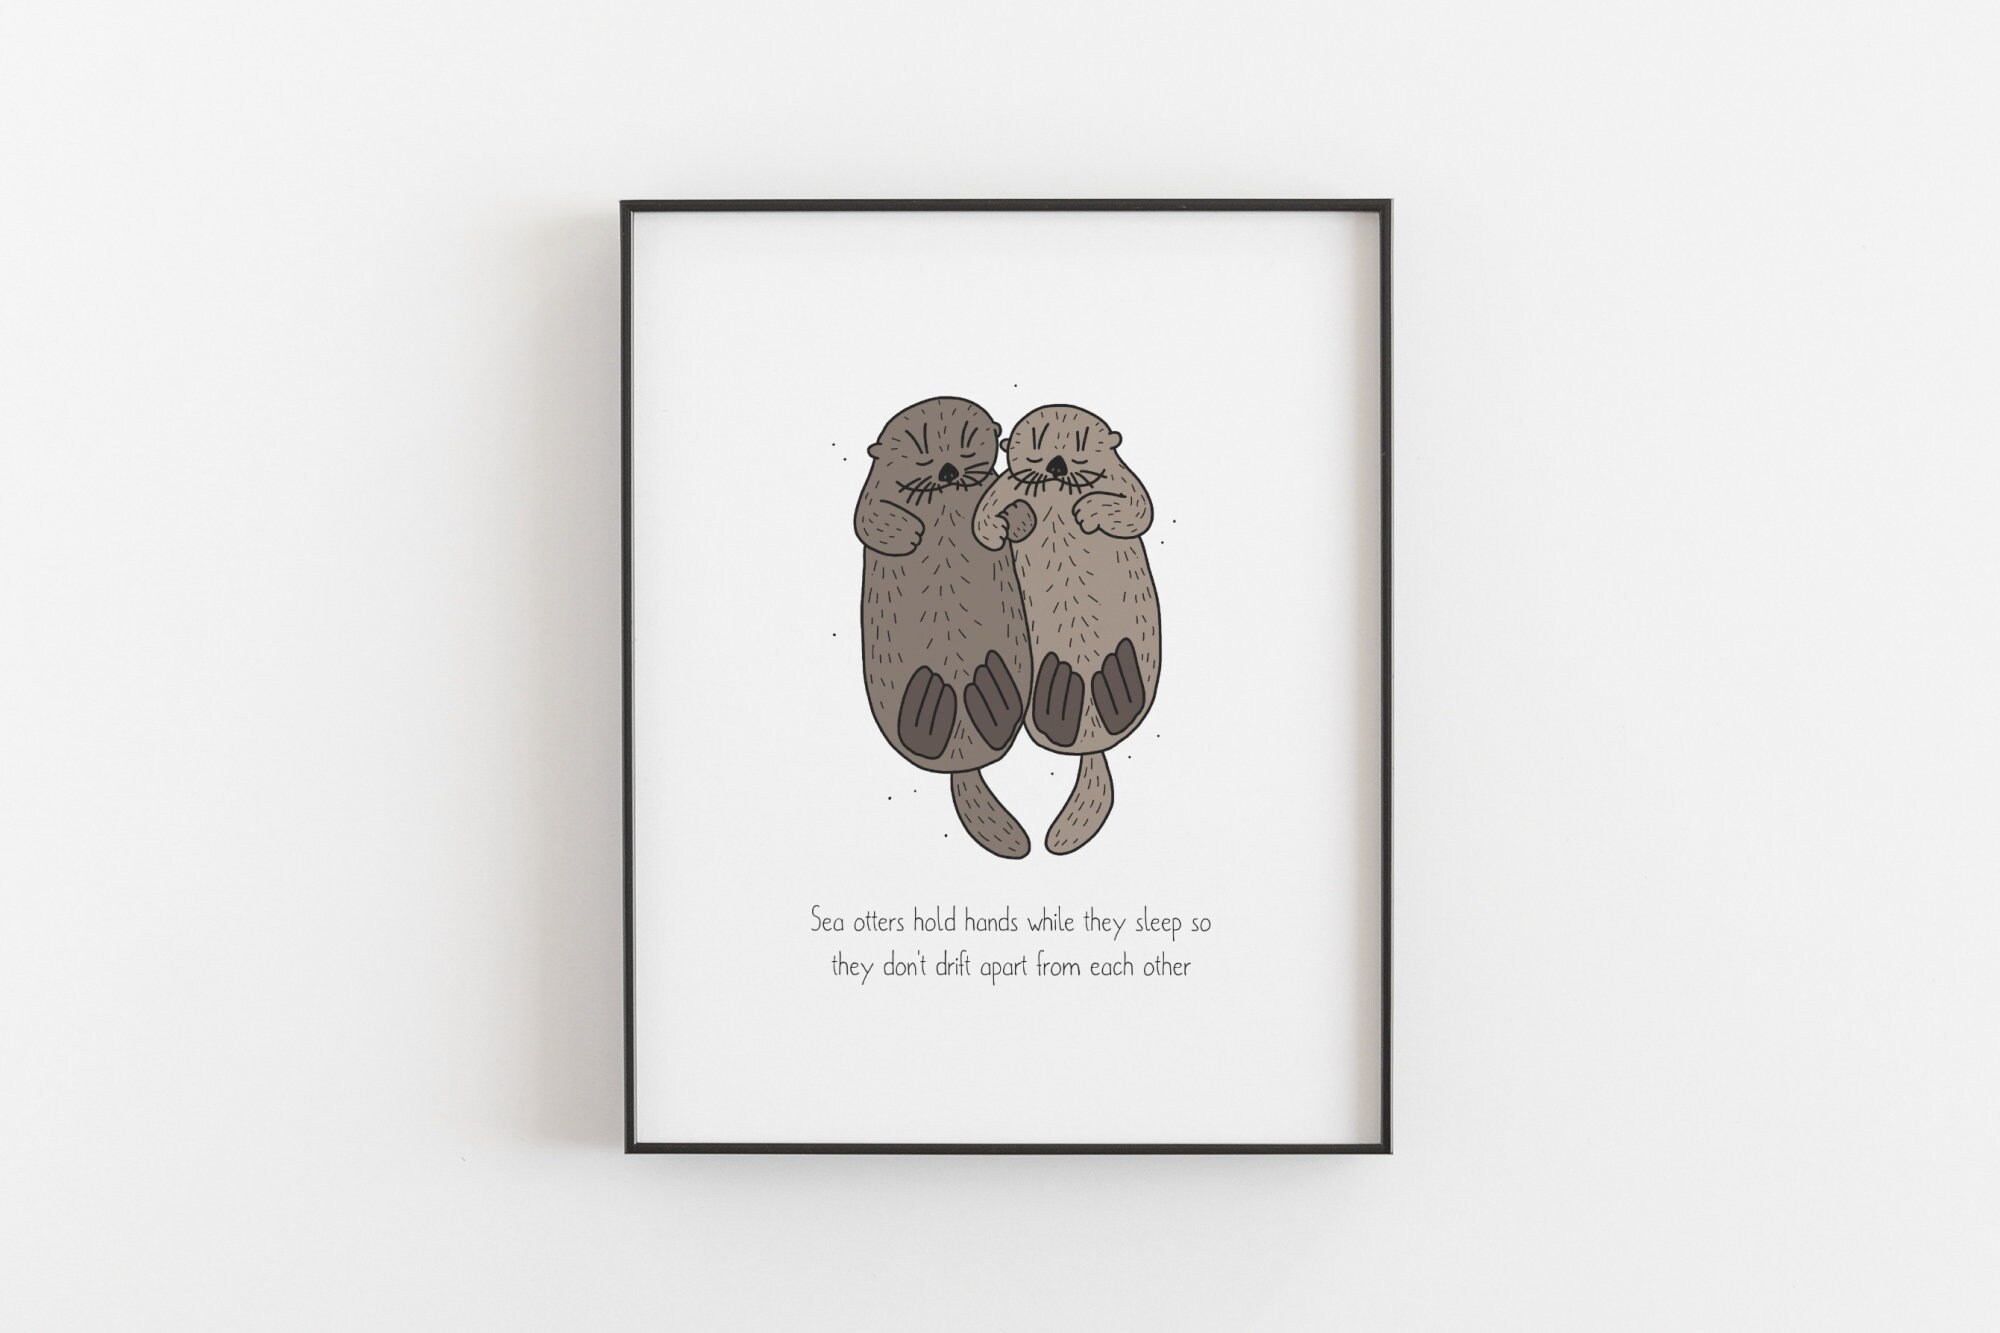 Discover Otter holding hands print - Funny animal poster, Sea otters, Love, Family, Friendship, No Frame